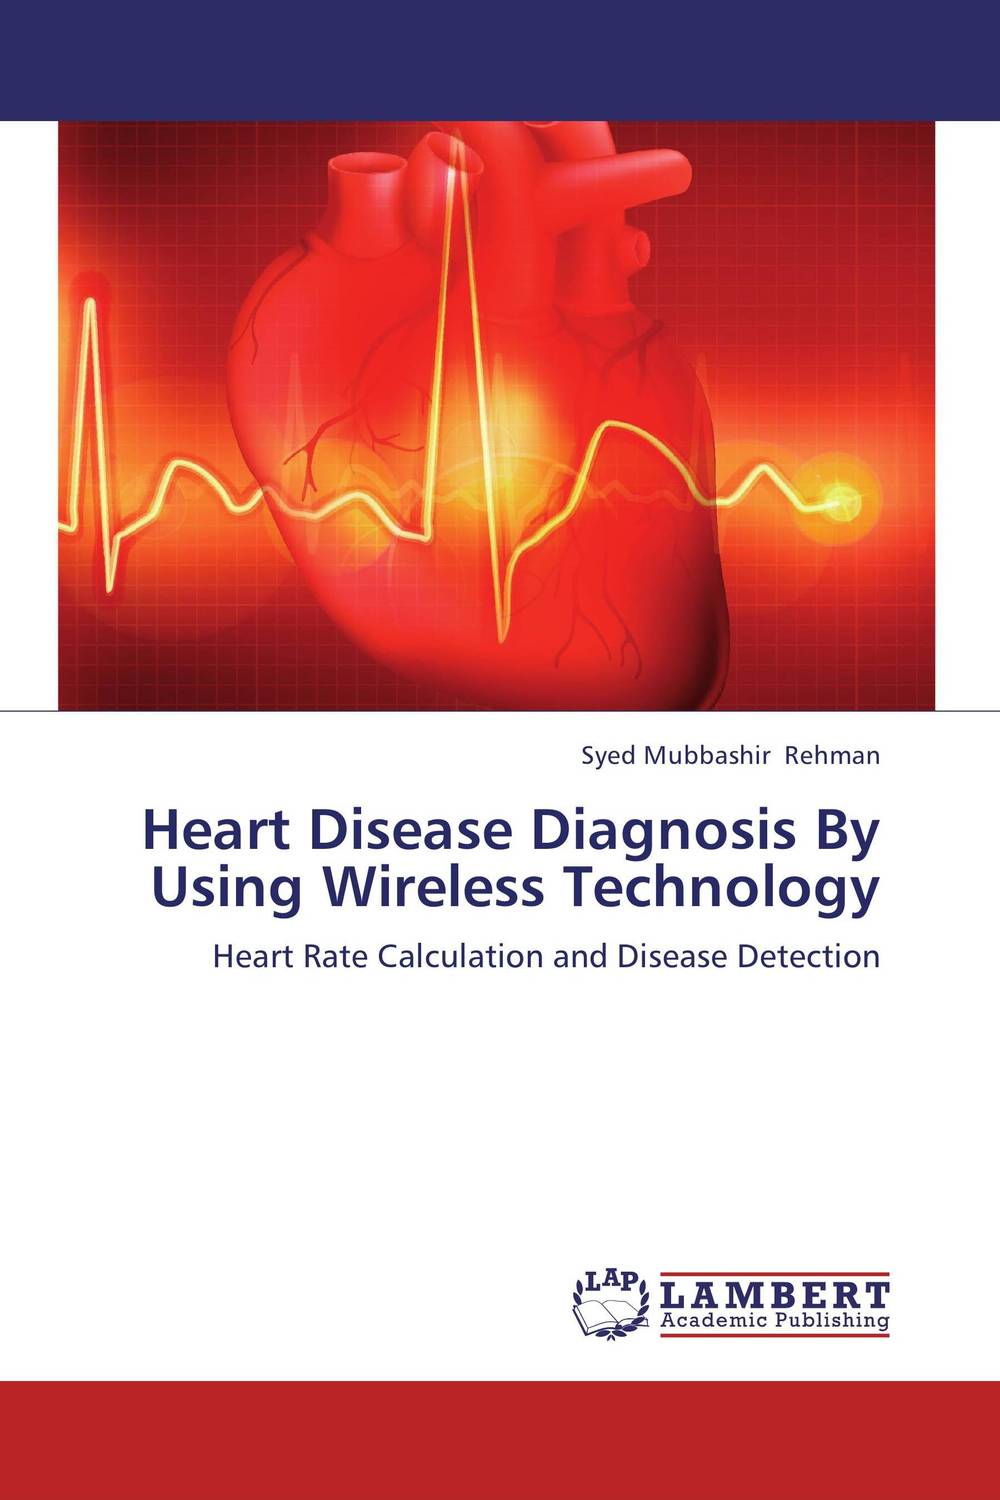 Heart Disease Diagnosis By Using Wireless Technology